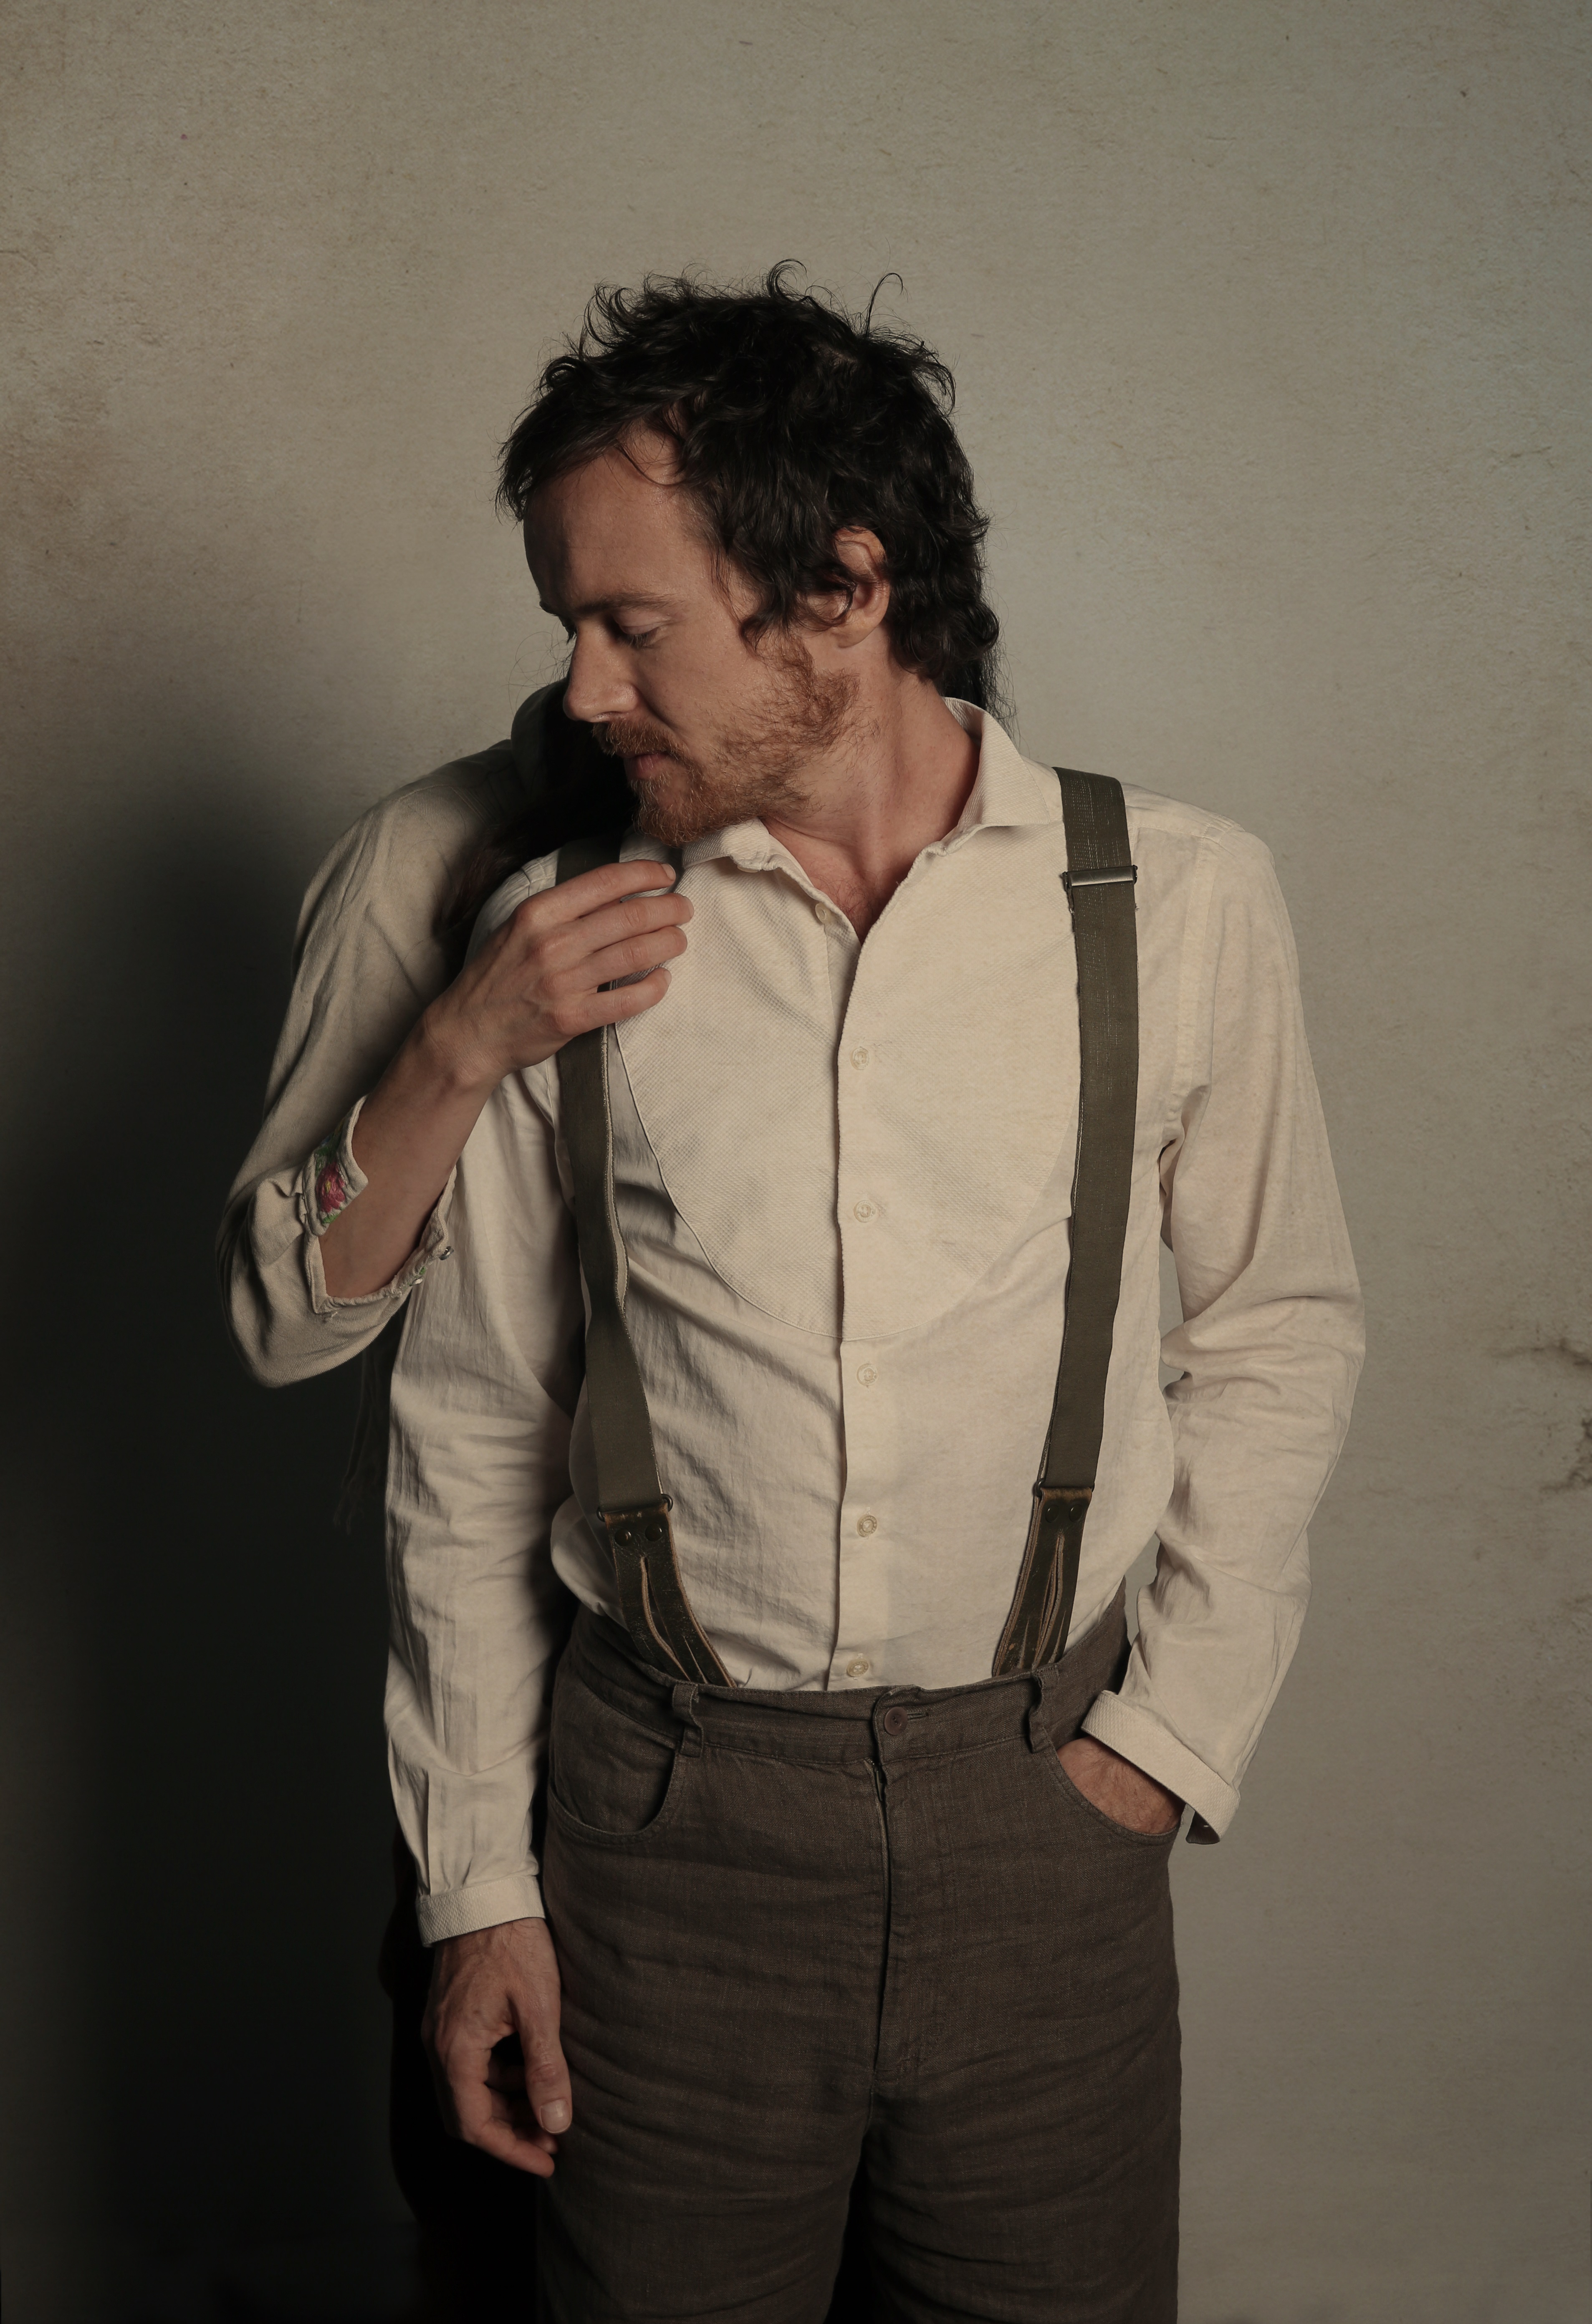 DAMIEN RICE REVEALS VIDEO FOR “I DON’T WANT TO CHANGE YOU”